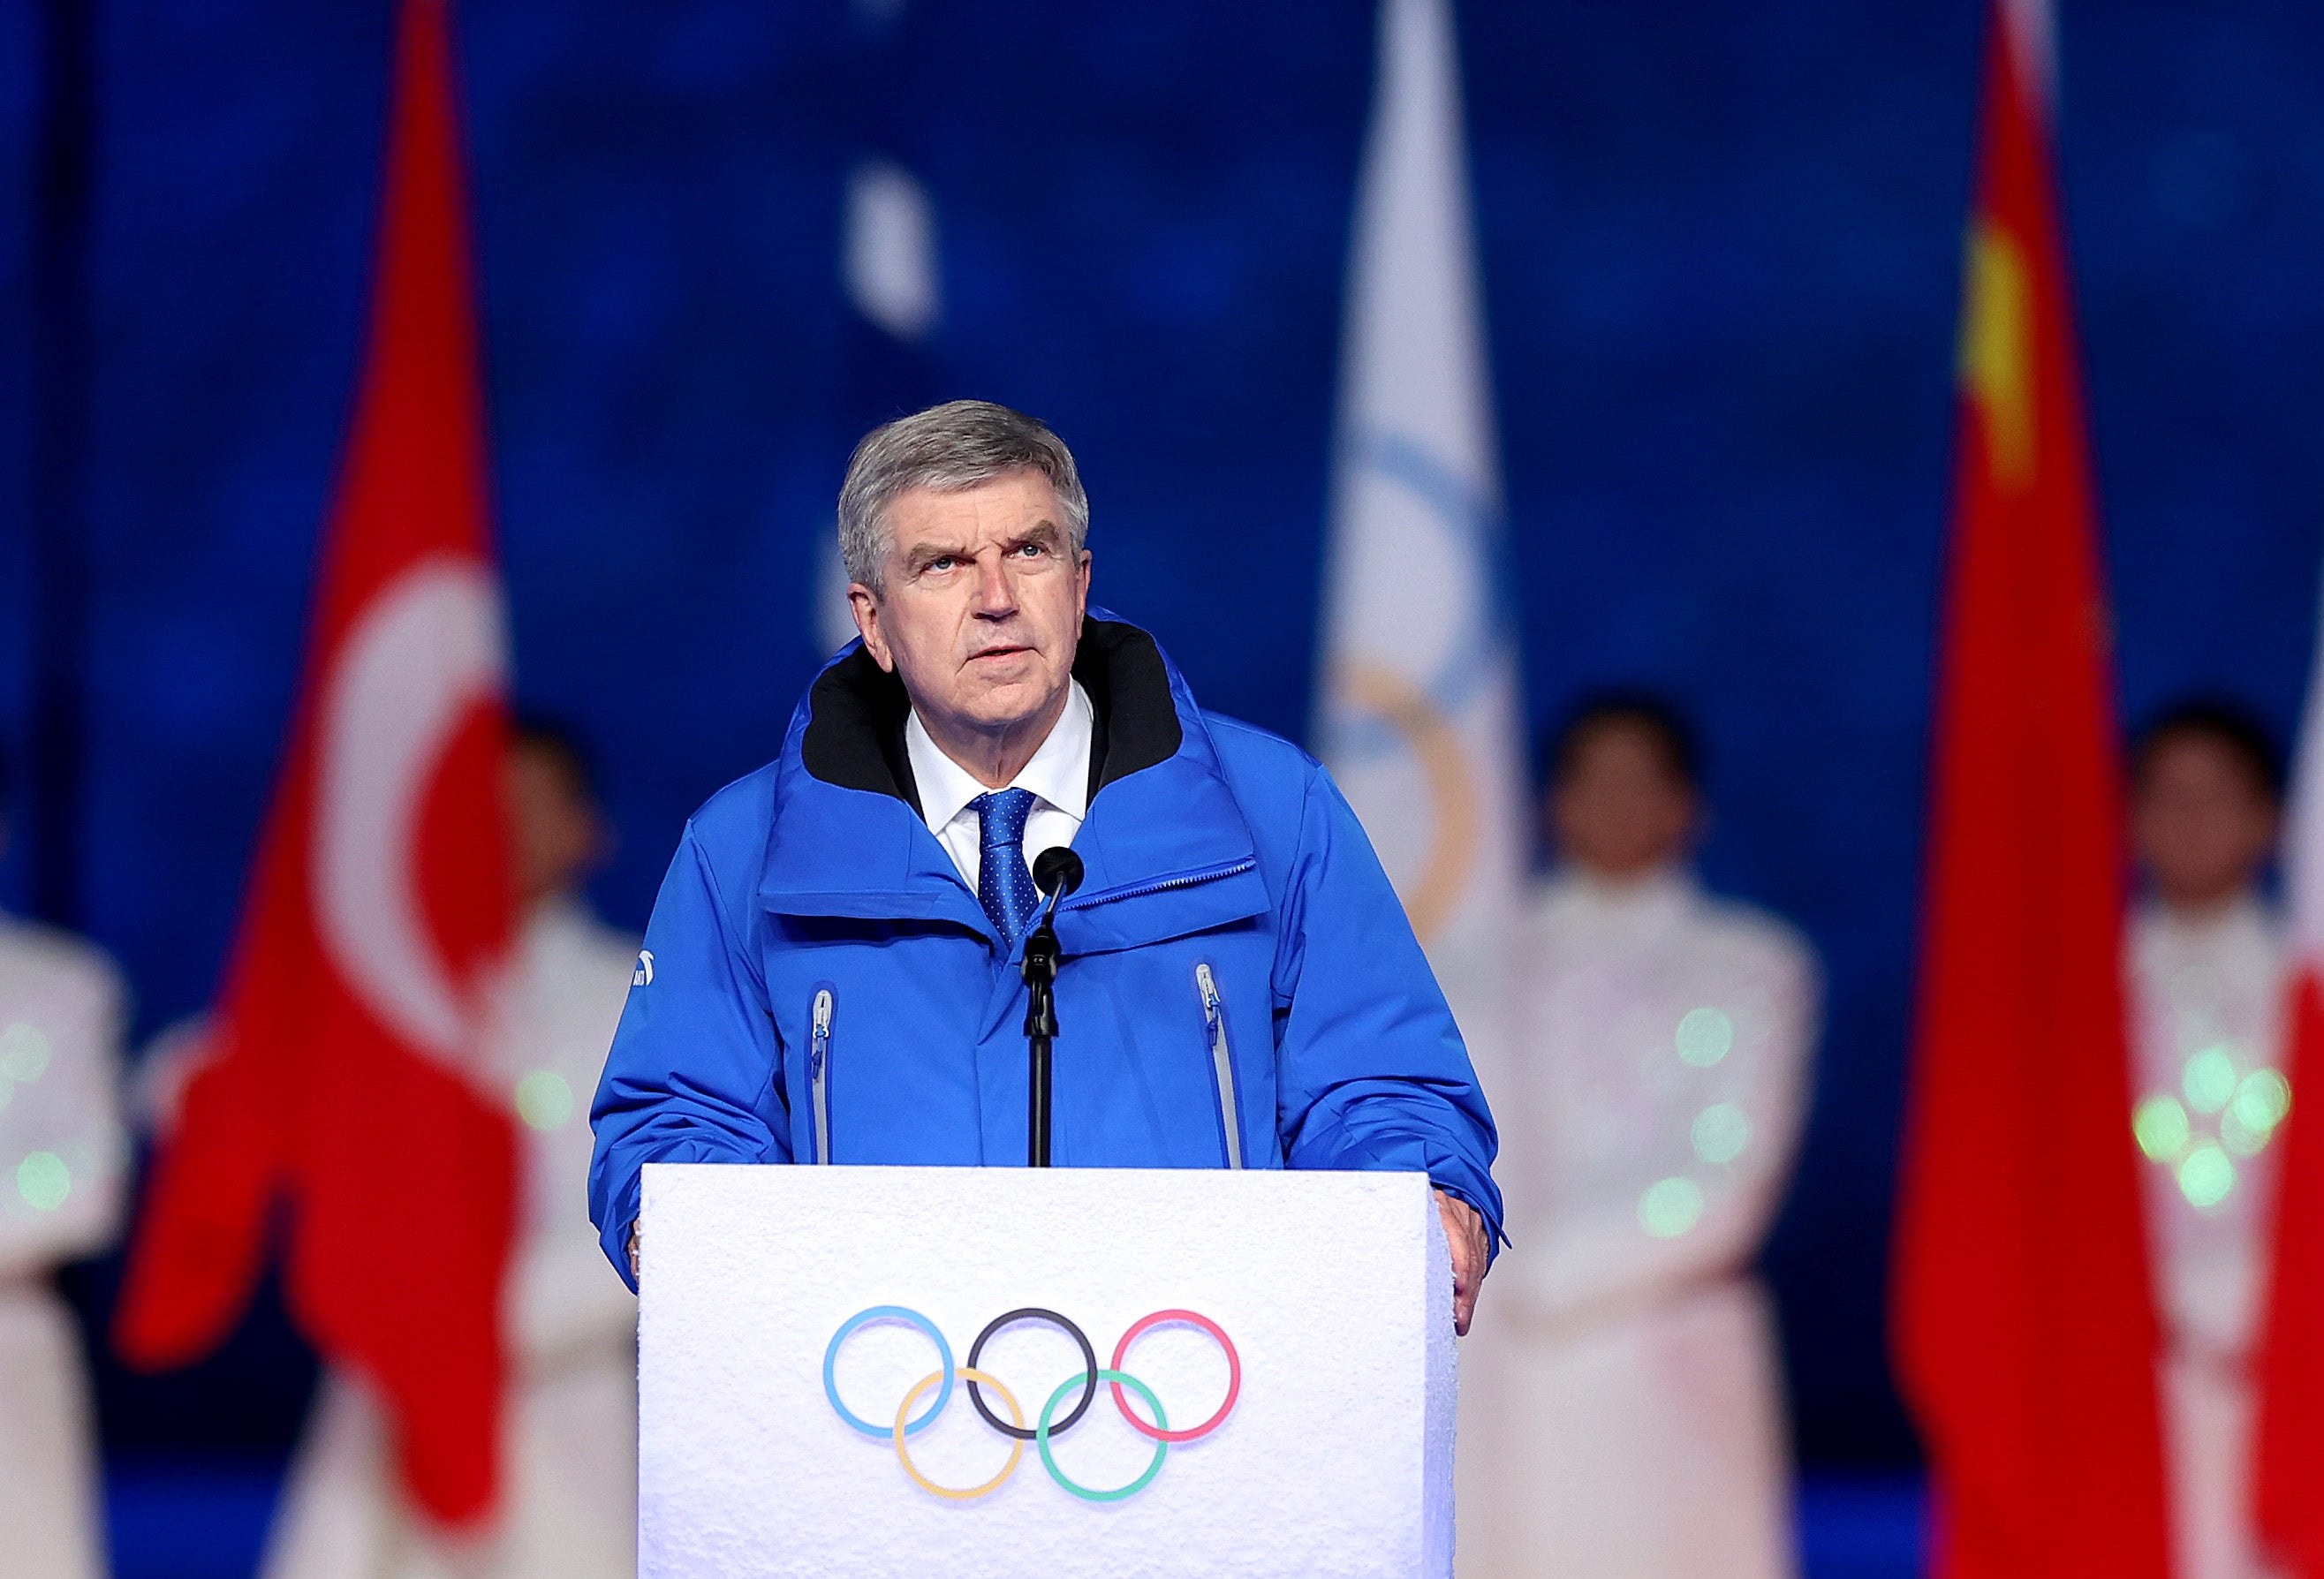 Thomas Bach is President of the IOC.